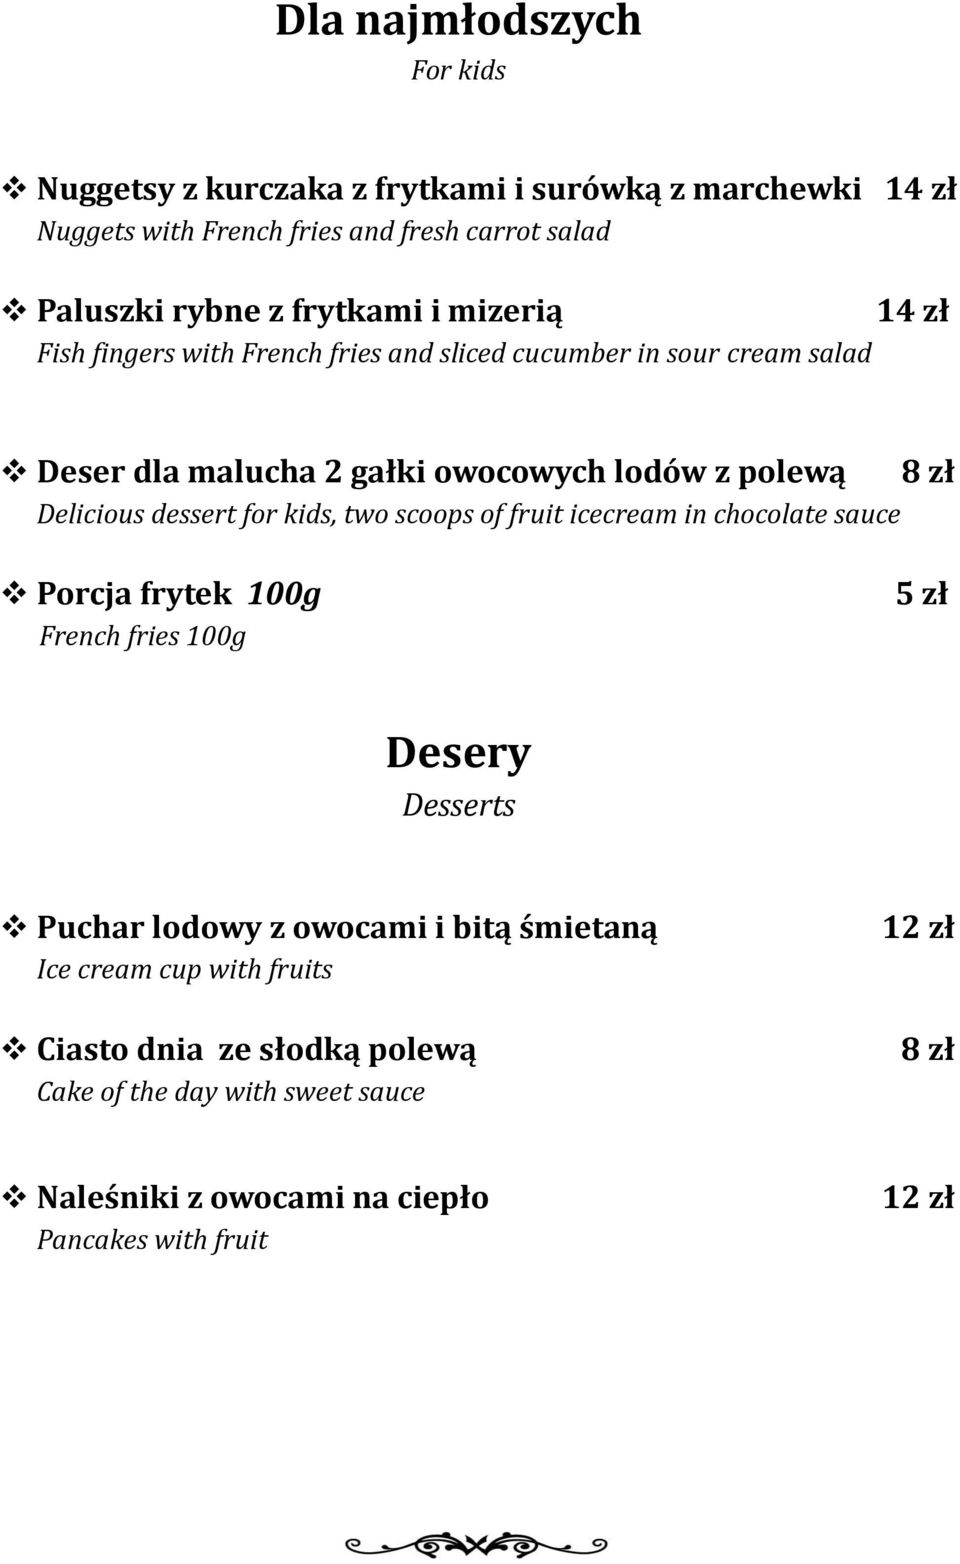 Delicious dessert for kids, two scoops of fruit icecream in chocolate sauce Porcja frytek 100g French fries 100g 5 zł Desery Desserts Puchar lodowy z owocami